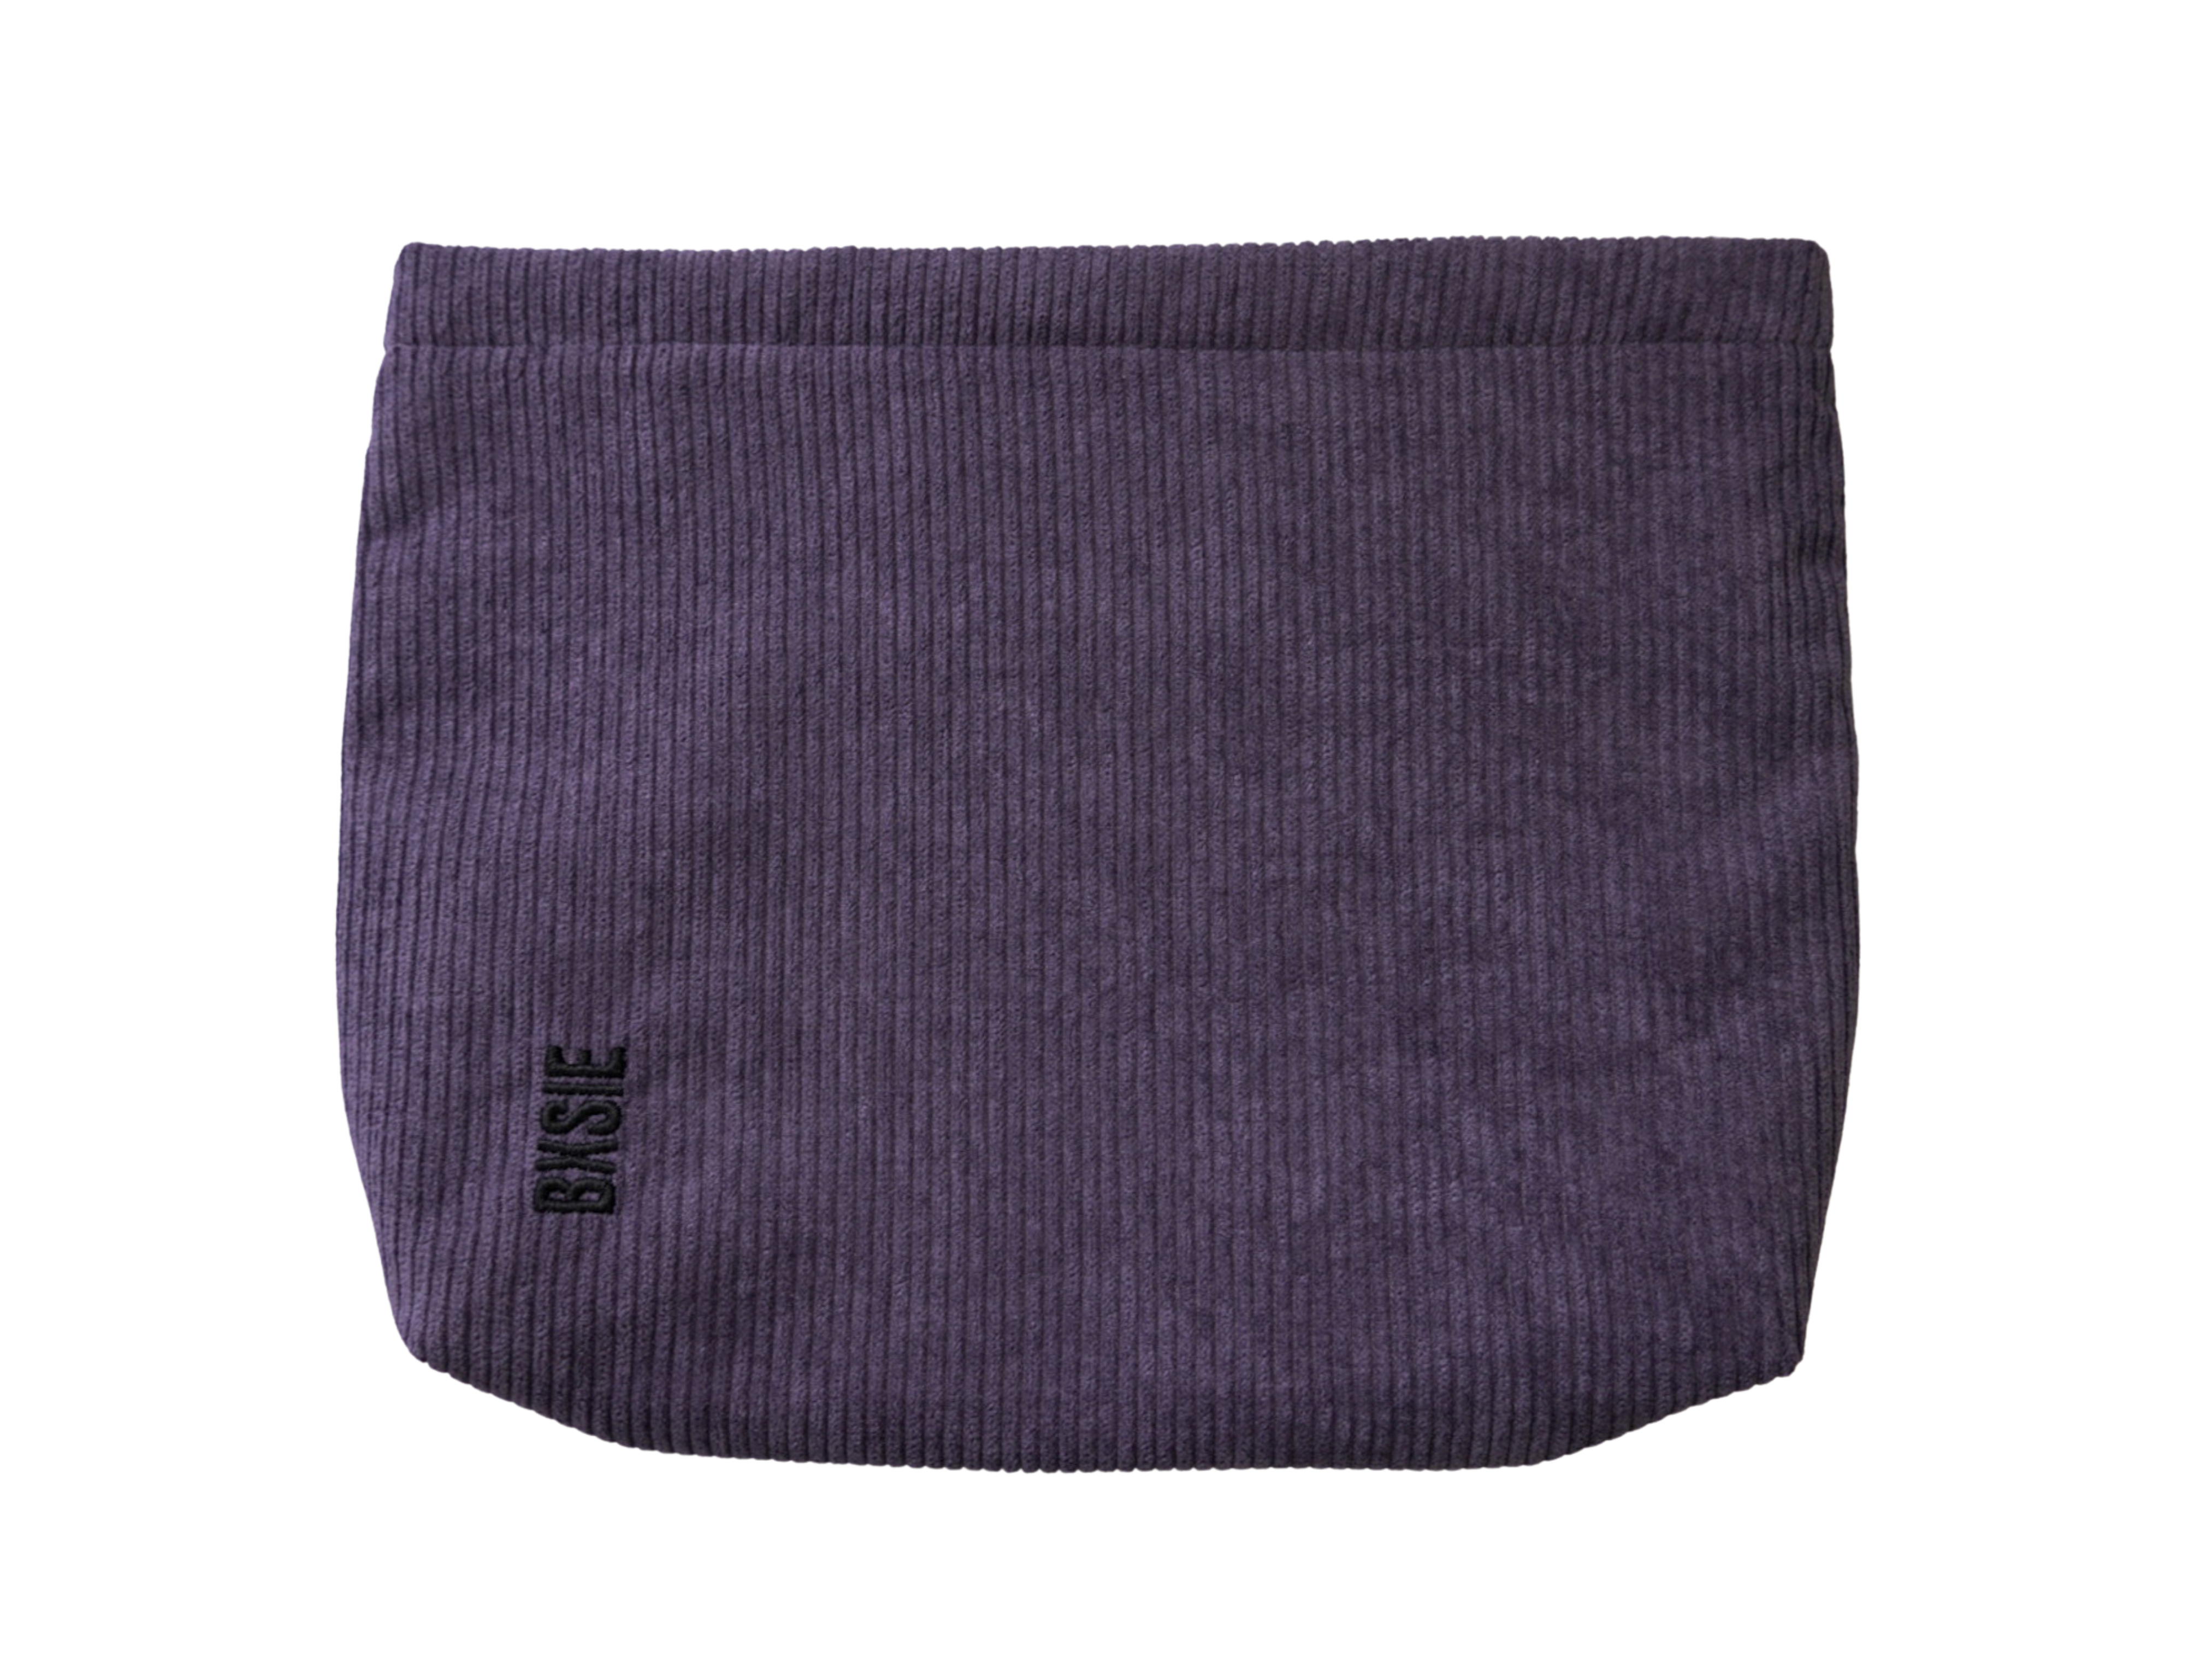 Purple BXSIE book sleeve book pouch for book lovers, front view, corduroy with zipper